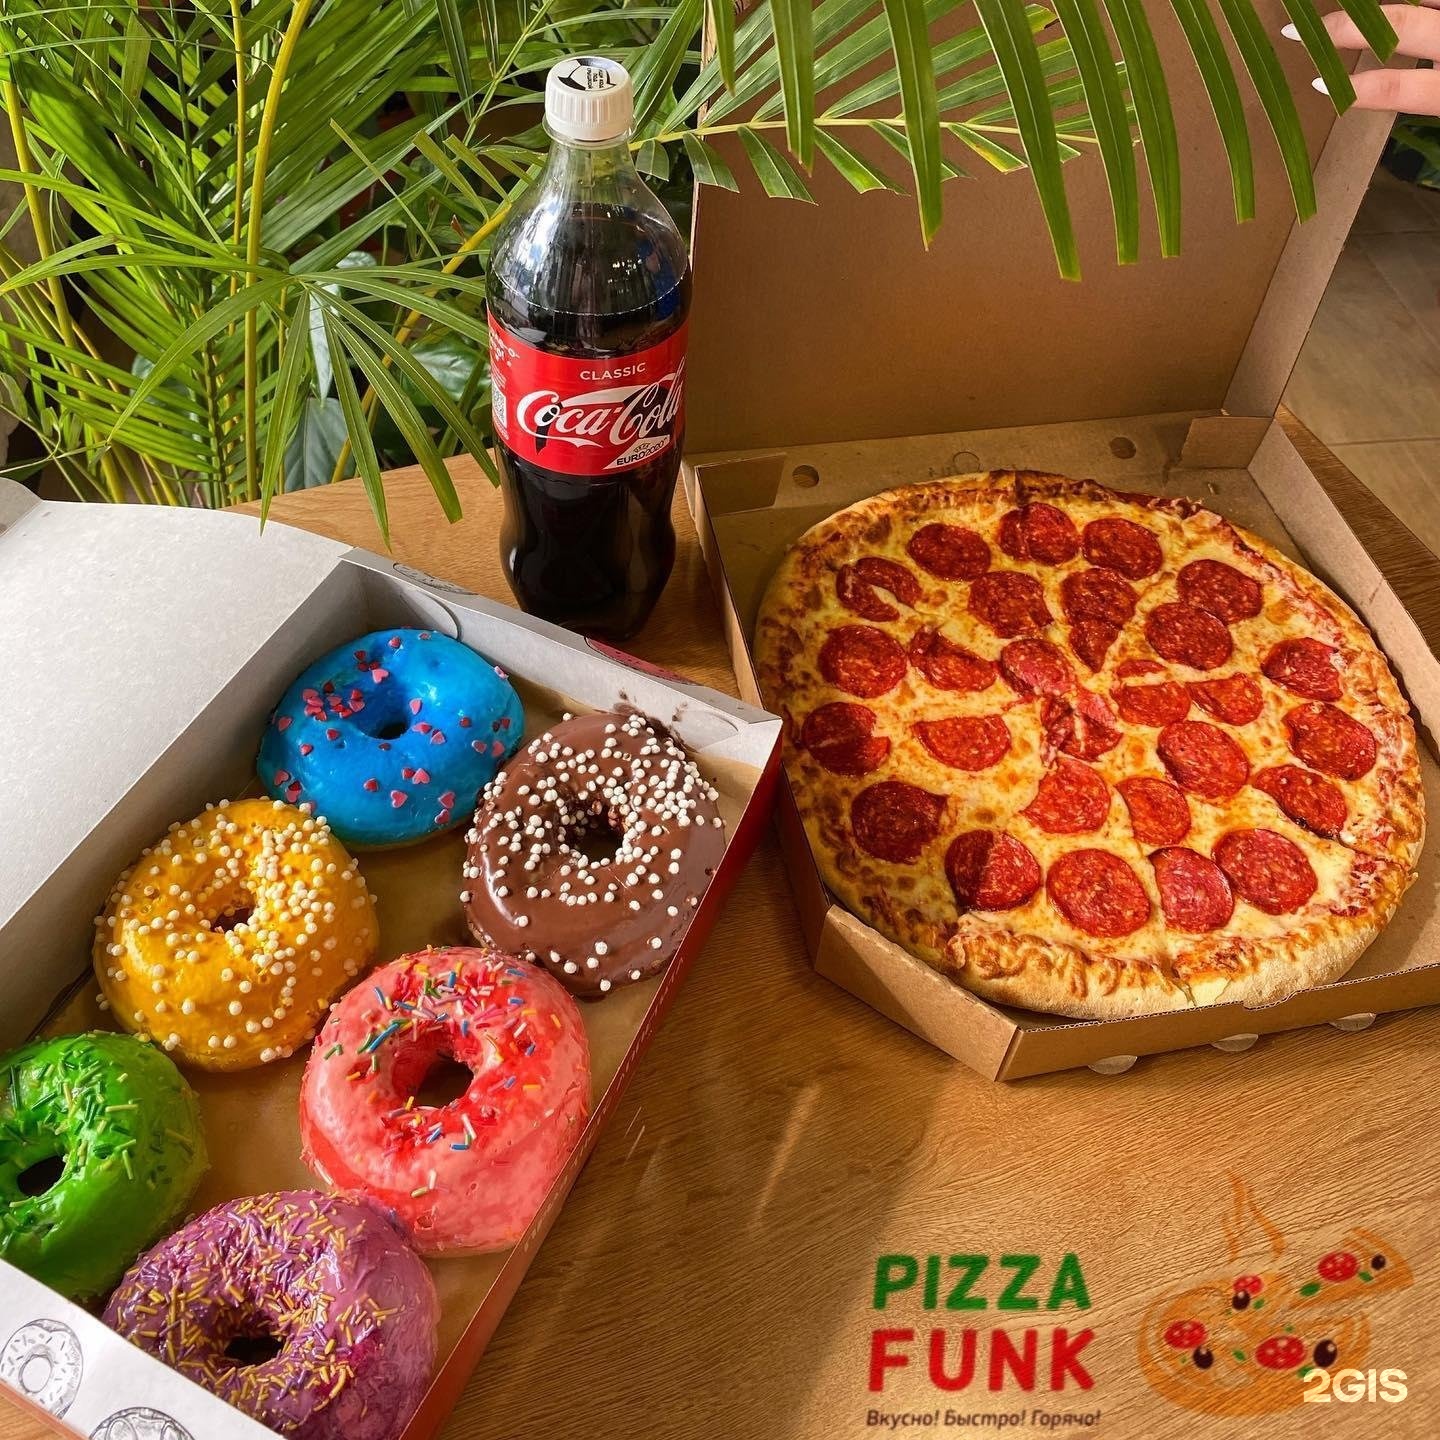 Пицца фанк. Пицца фанк 34 Волгоград. Its time to get Funky pizza Tower ананас. Funk Fo pizza Funk.